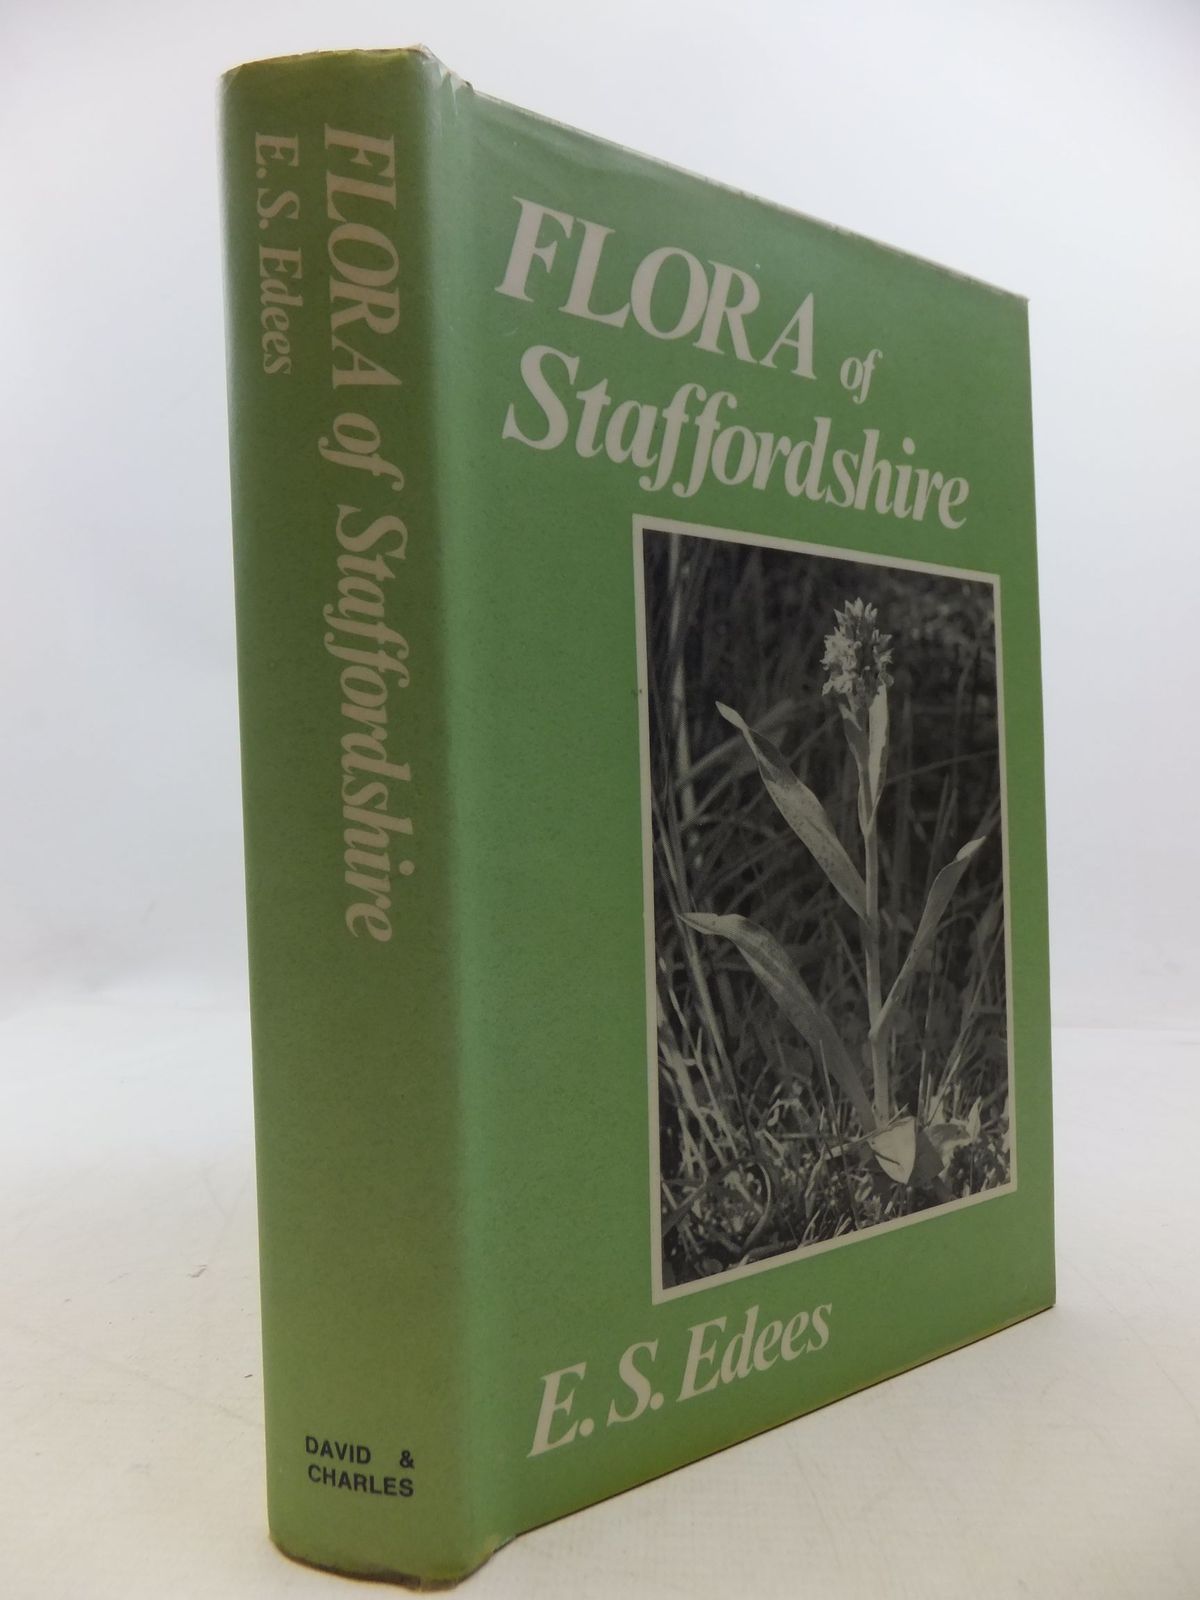 Photo of FLORA OF STAFFORDSHIRE written by Edees, E.S. published by David & Charles (STOCK CODE: 2112308)  for sale by Stella & Rose's Books